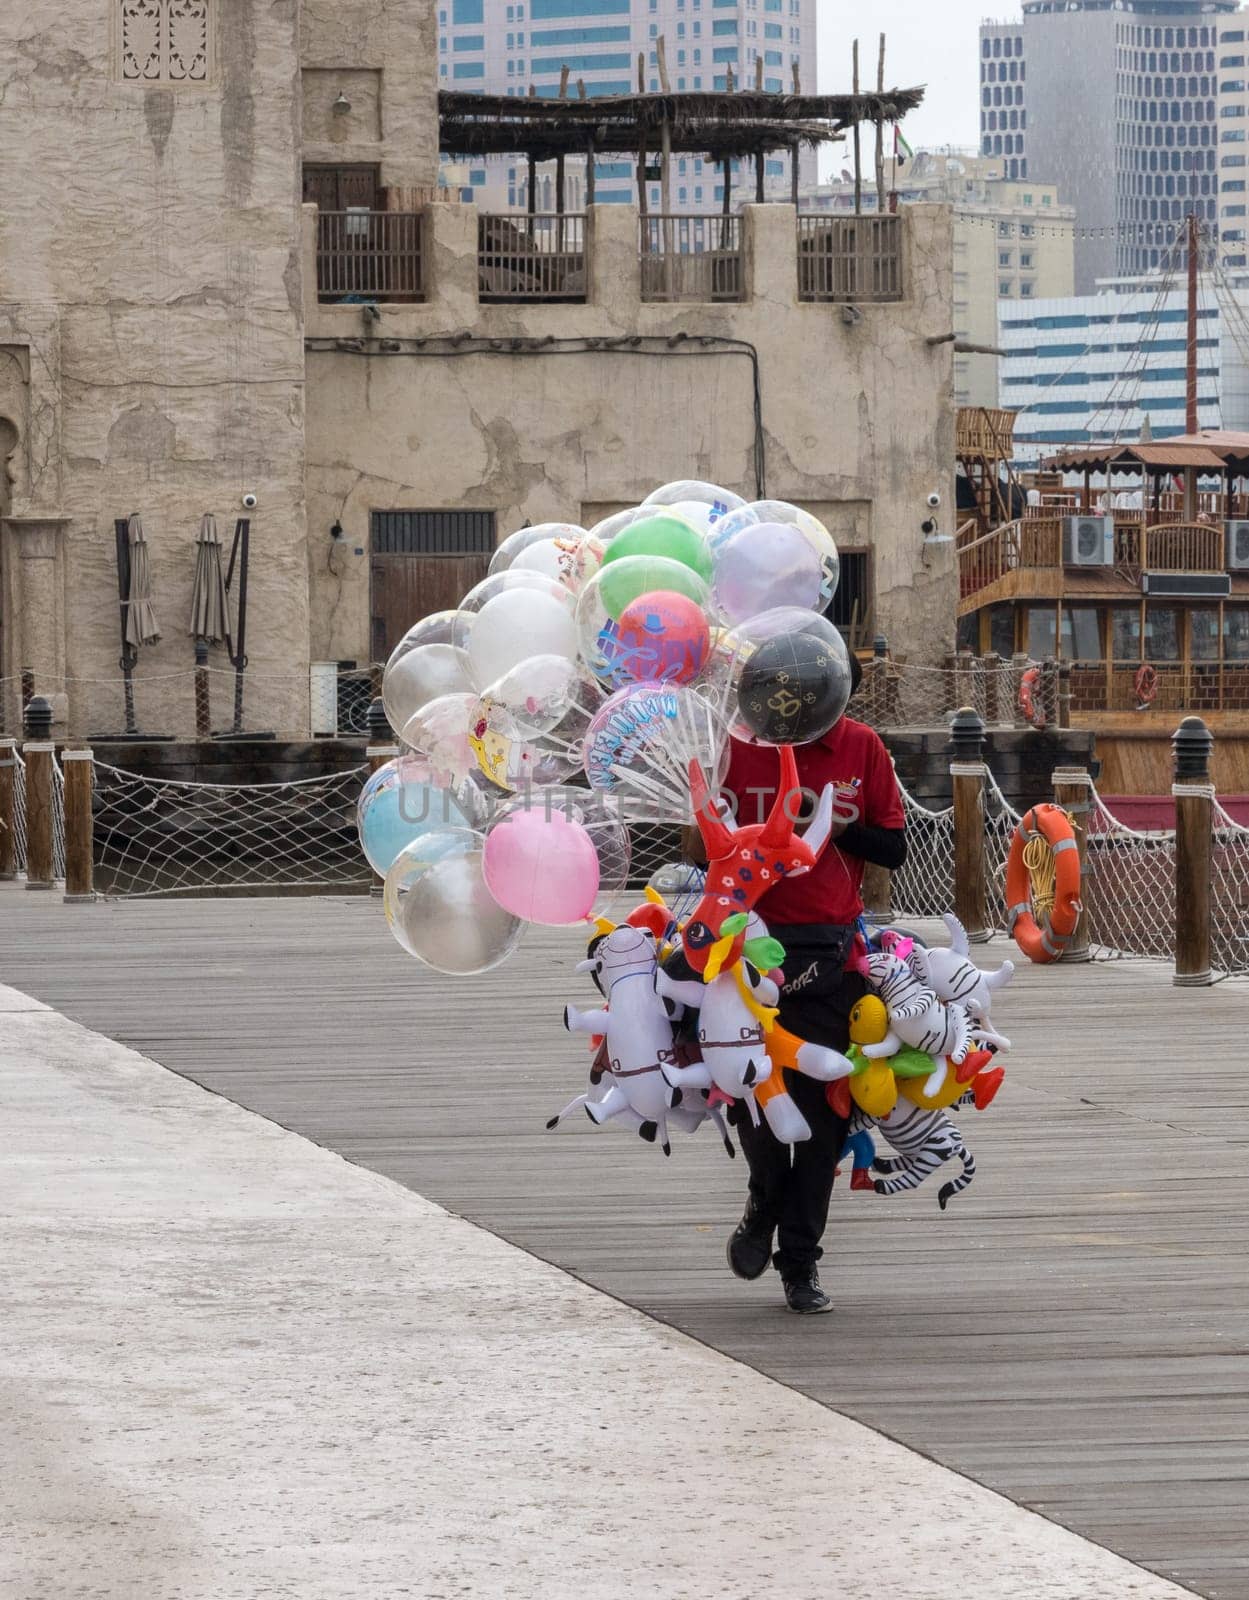 Street trader with balloons in the Al Seef boardwalk area of Bur Dubai by steheap